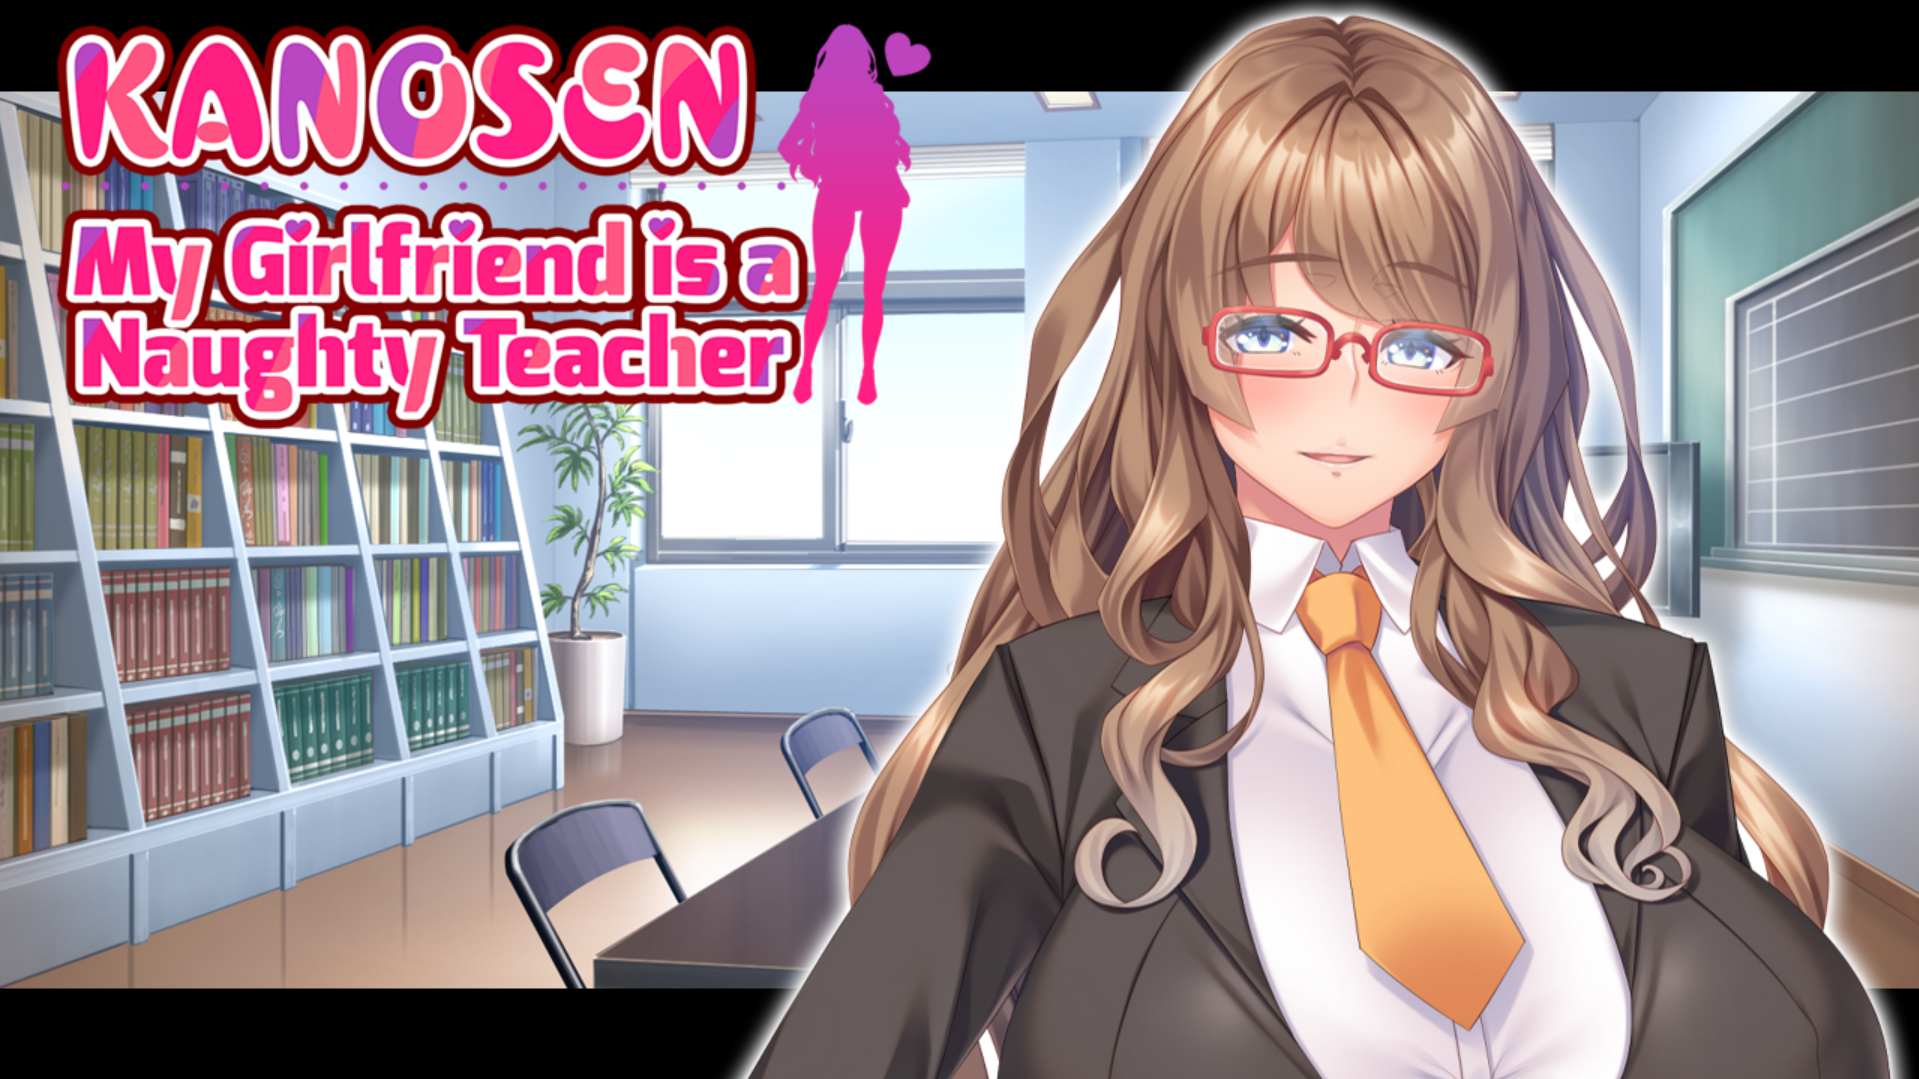 Gf Sex Engine Videos Download - KANOSEN â€“ My Girlfriend is a Naughty Teacher [COMPLETED] - free game  download, reviews, mega - xGames